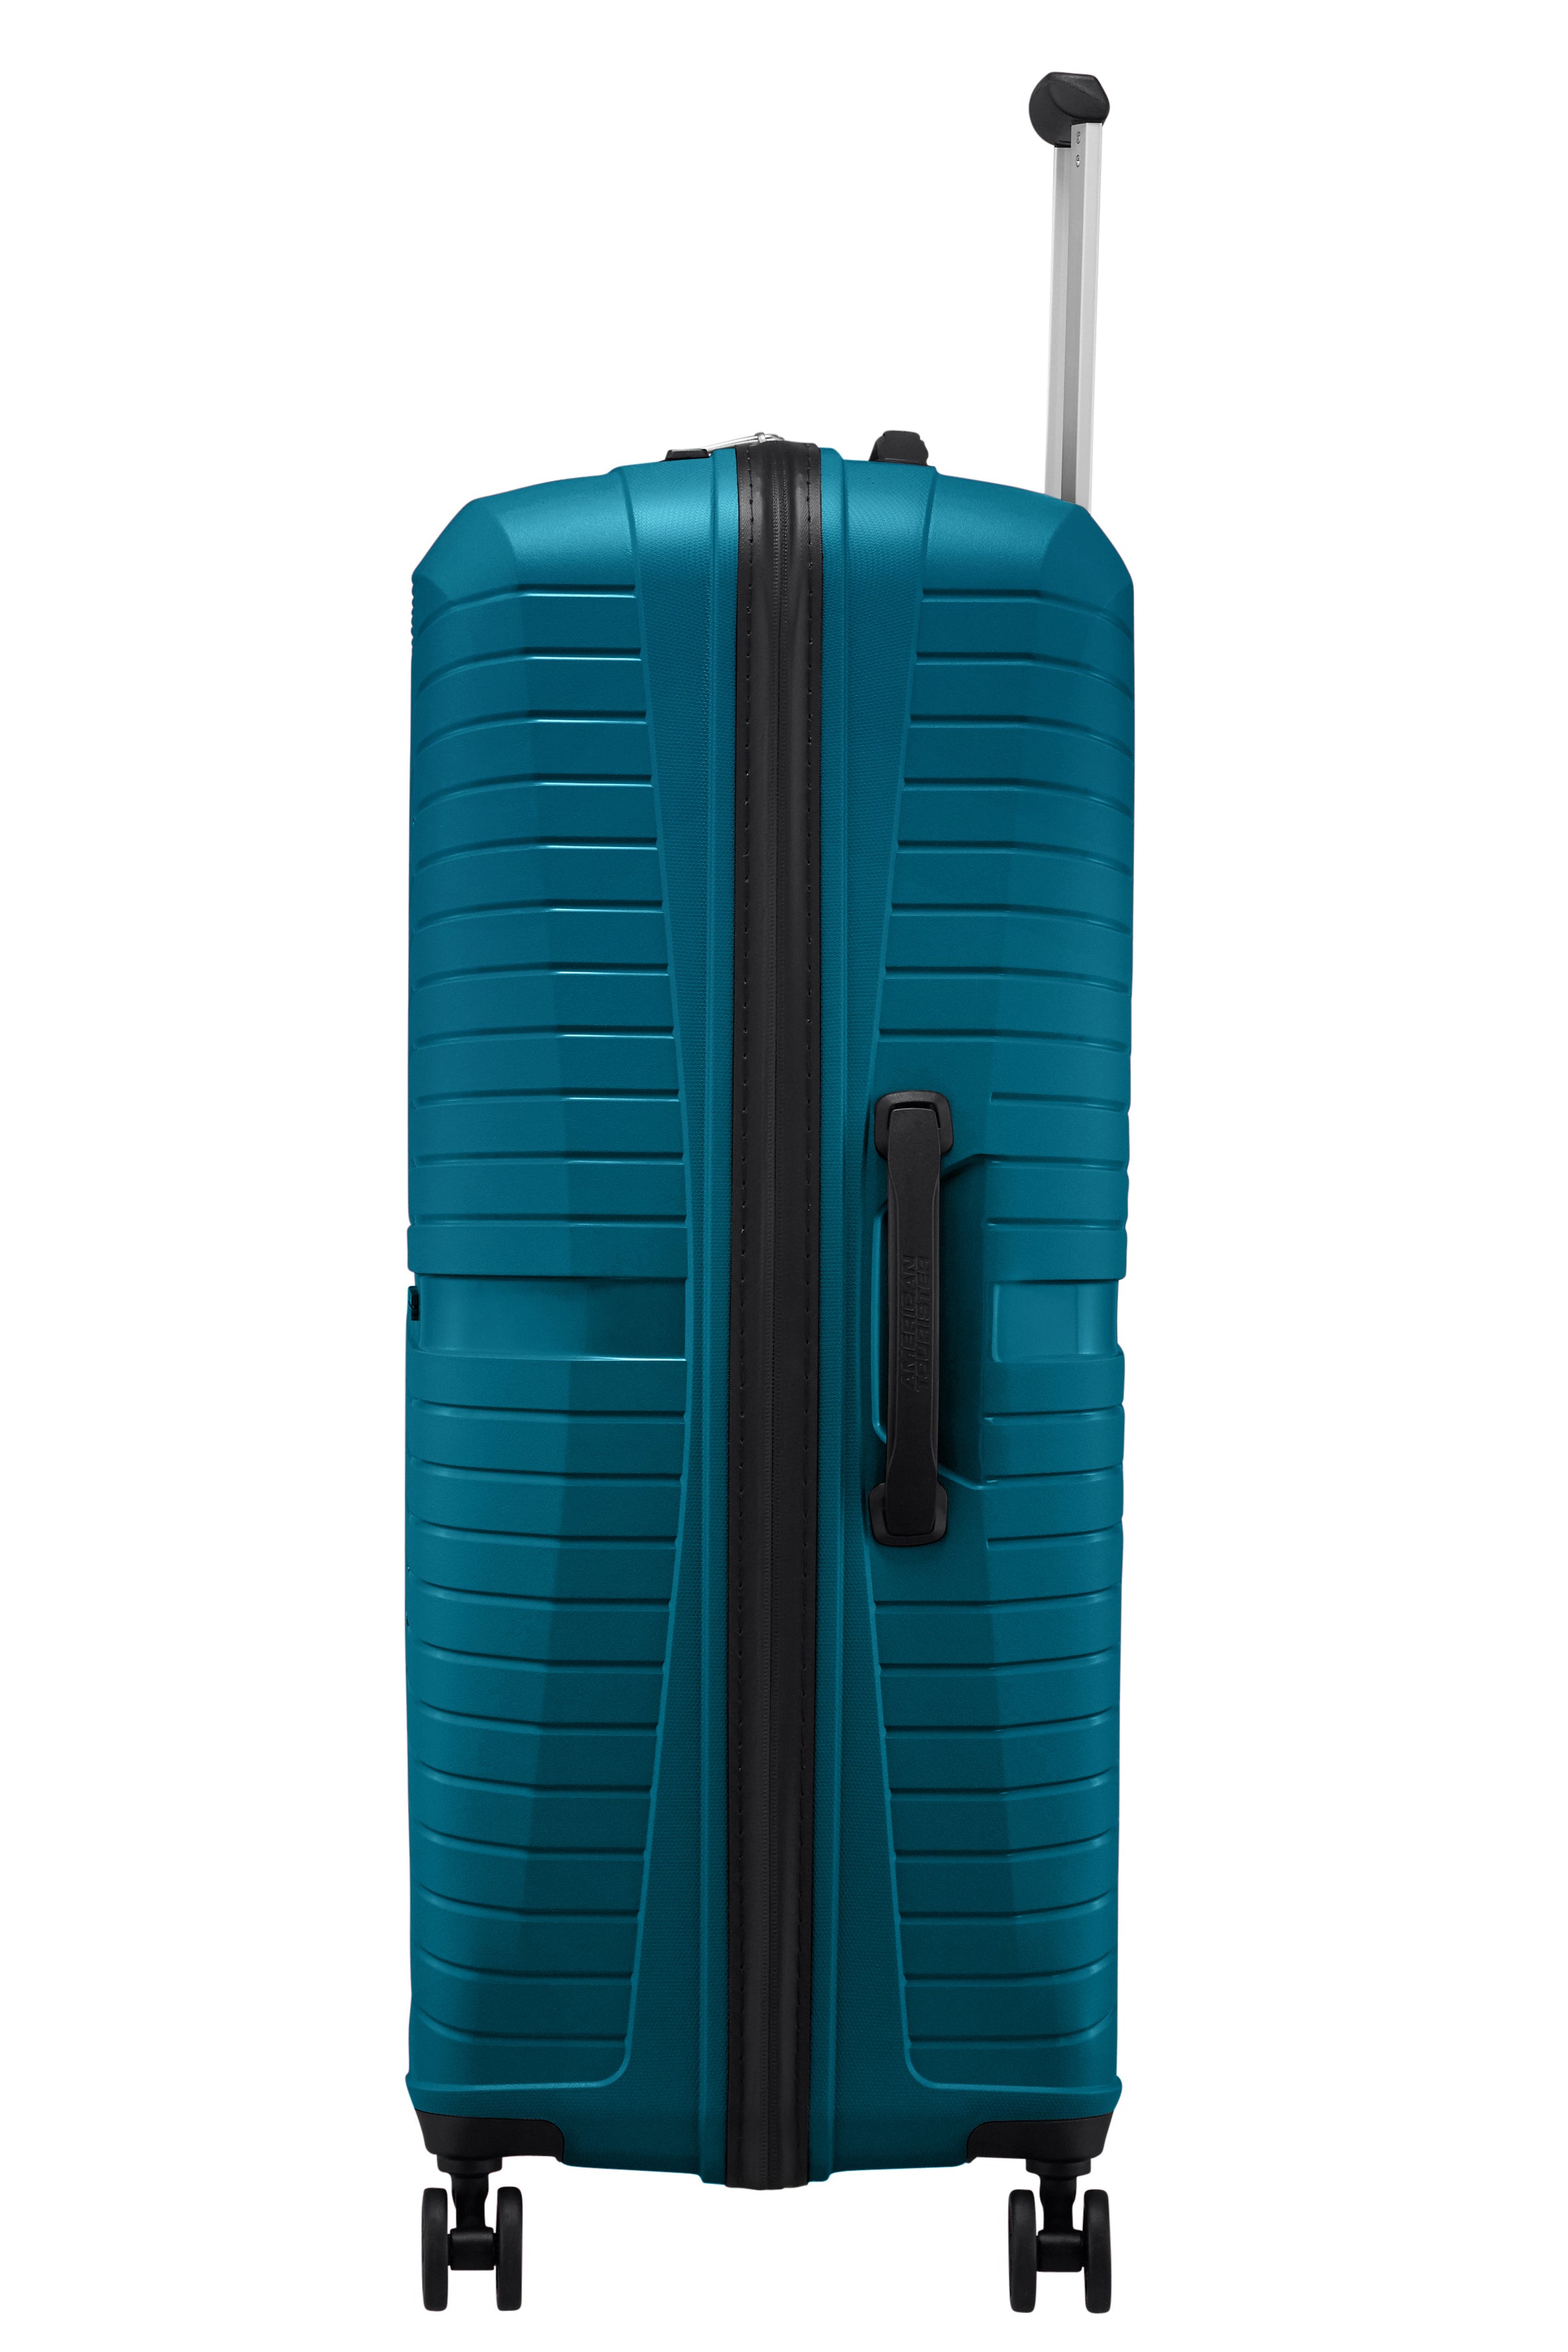 American Tourister - Airconic 77cm Large Suitcase - Deep Ocean-3